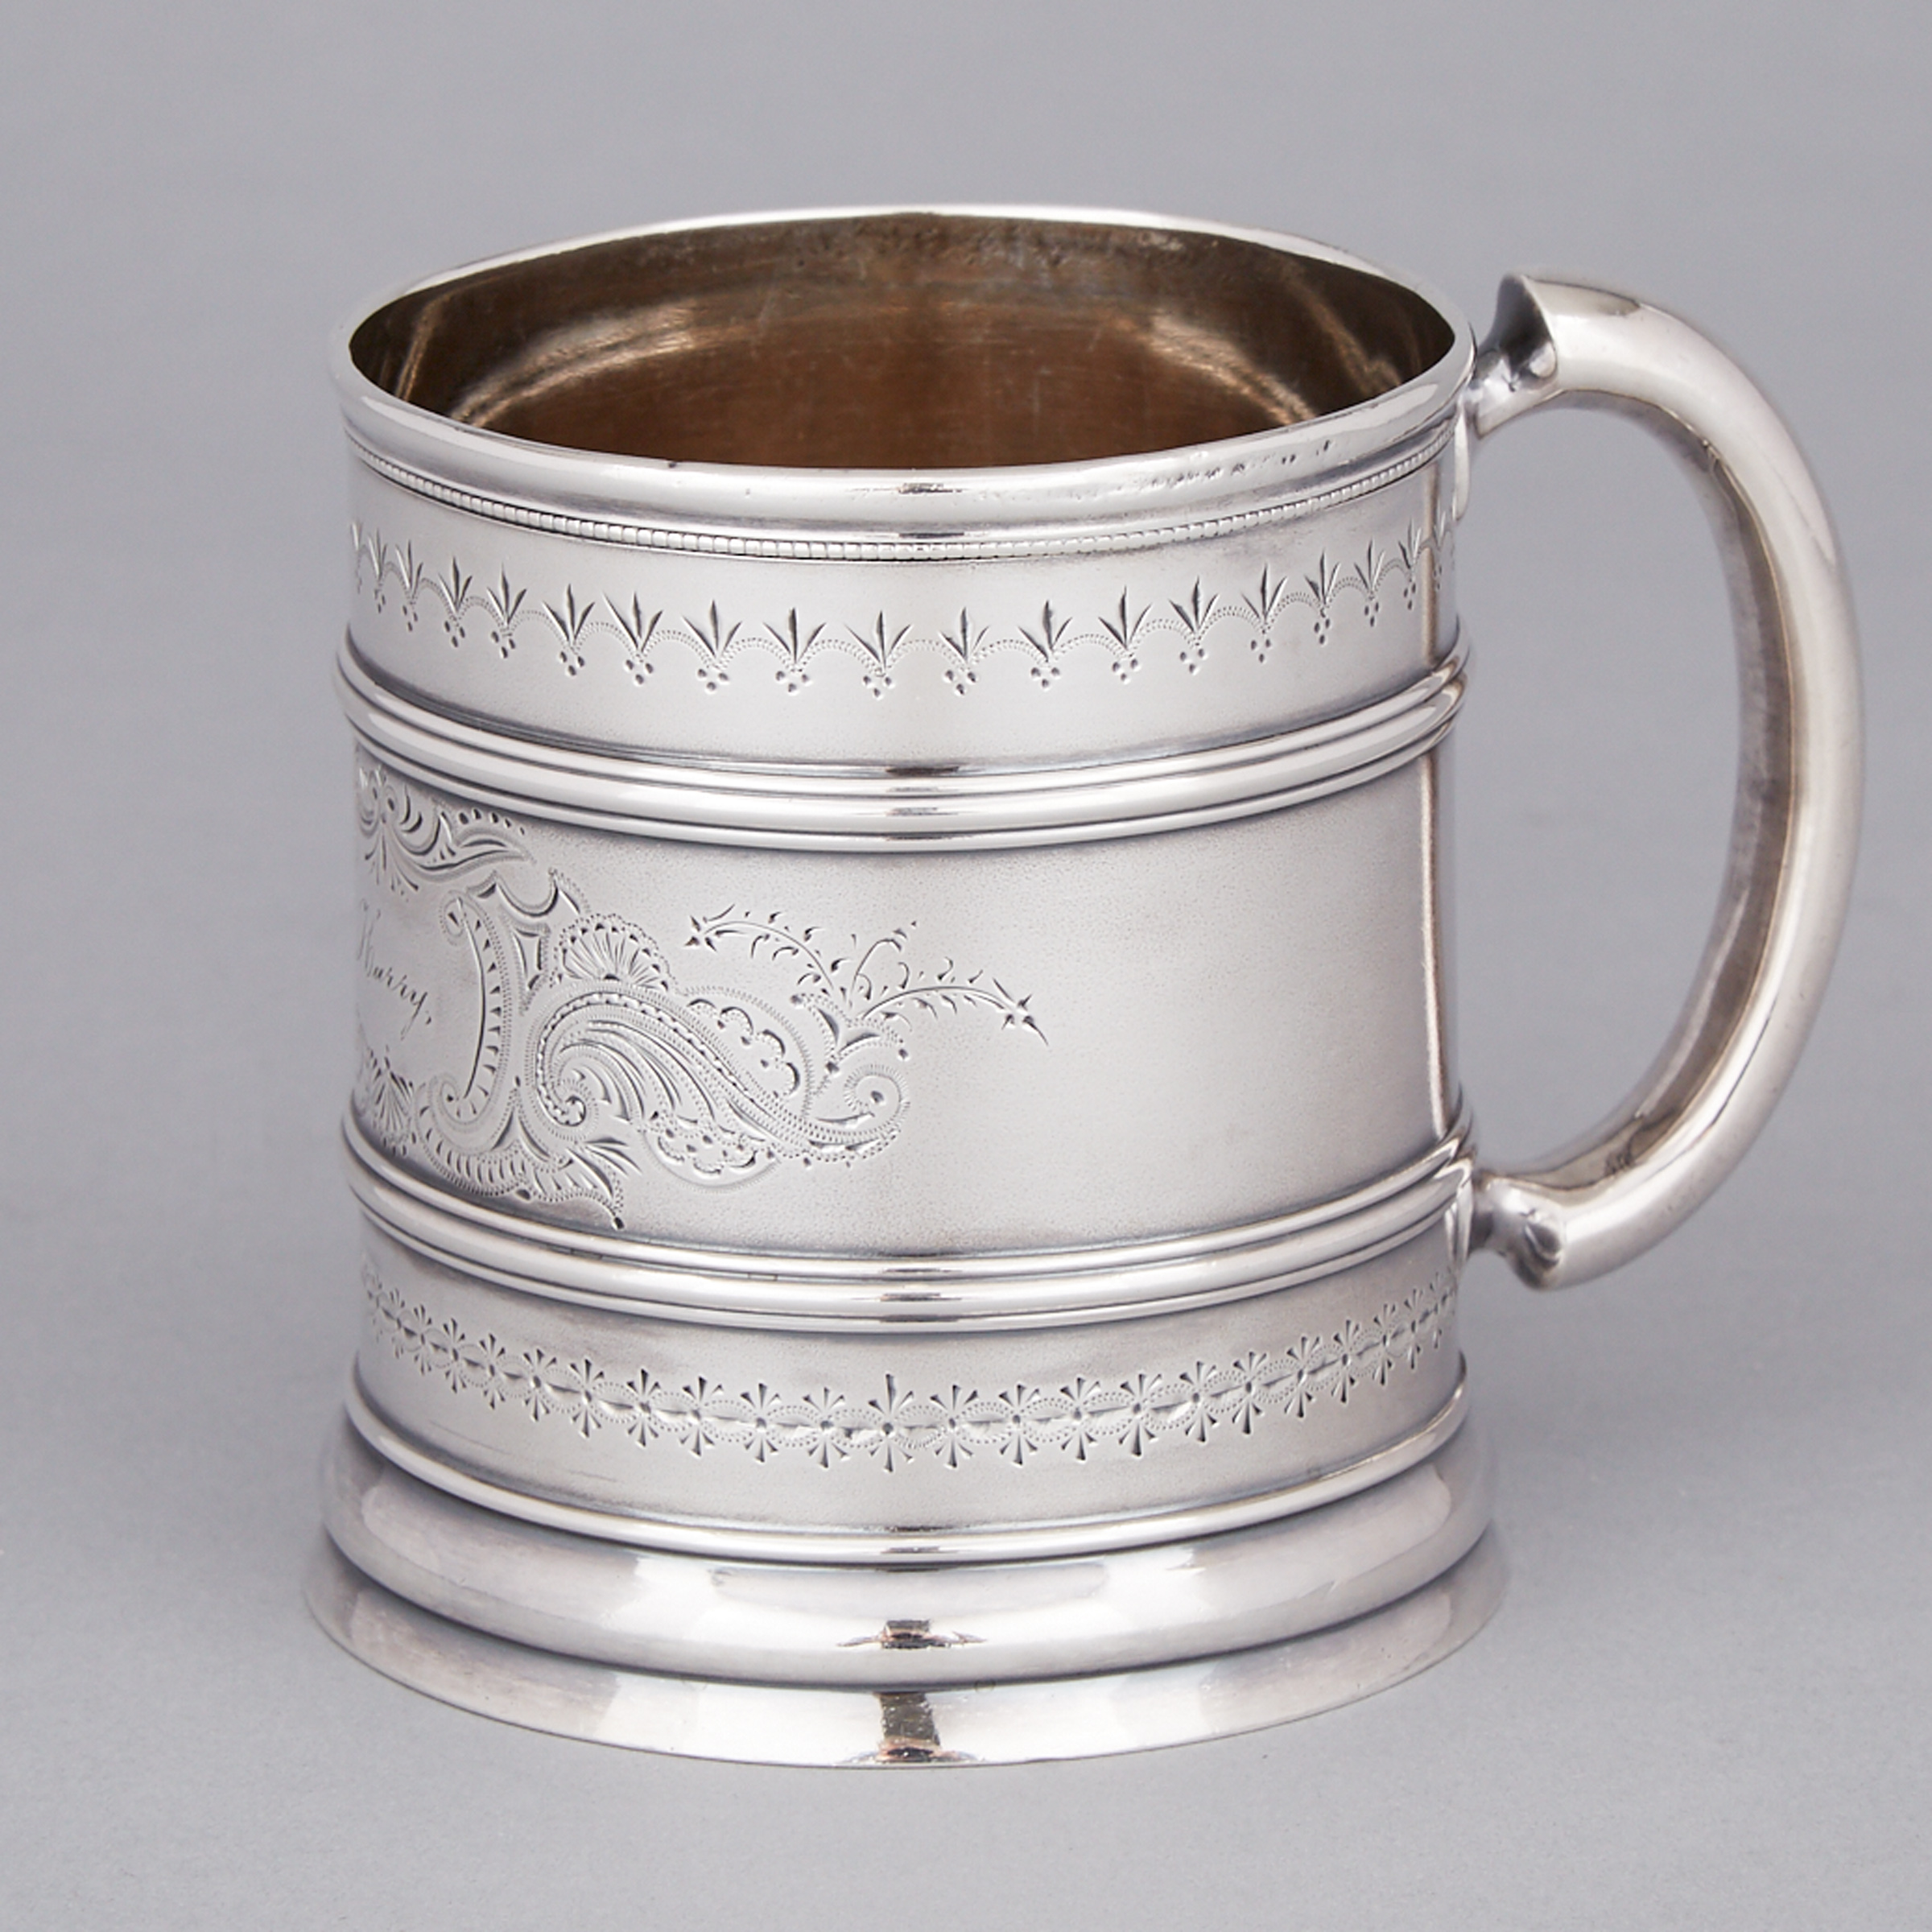 Canadian Silver Mug, Hendery & Leslie, Montreal, Que., late 19th century